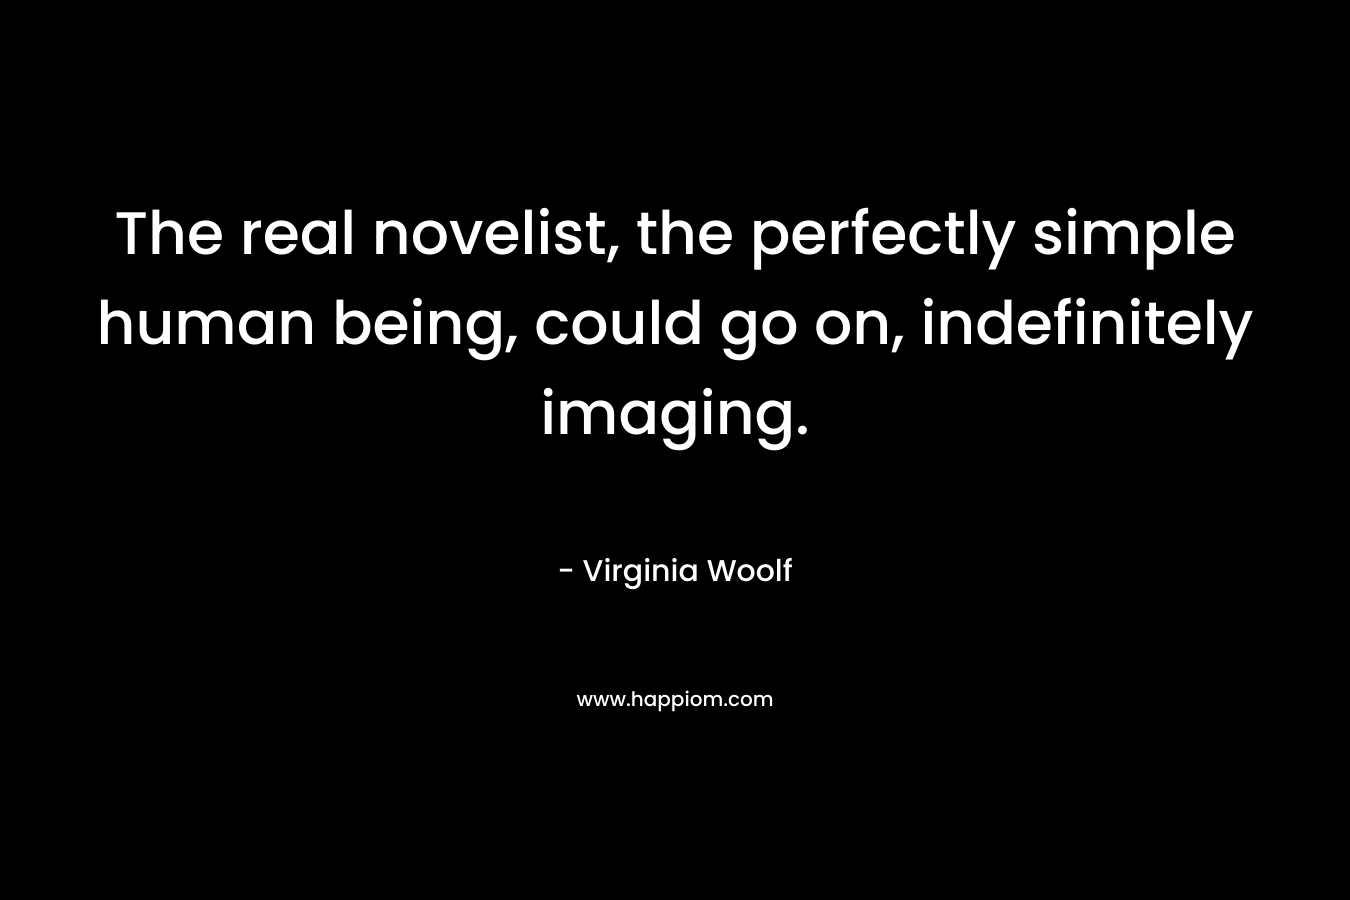 The real novelist, the perfectly simple human being, could go on, indefinitely imaging. 